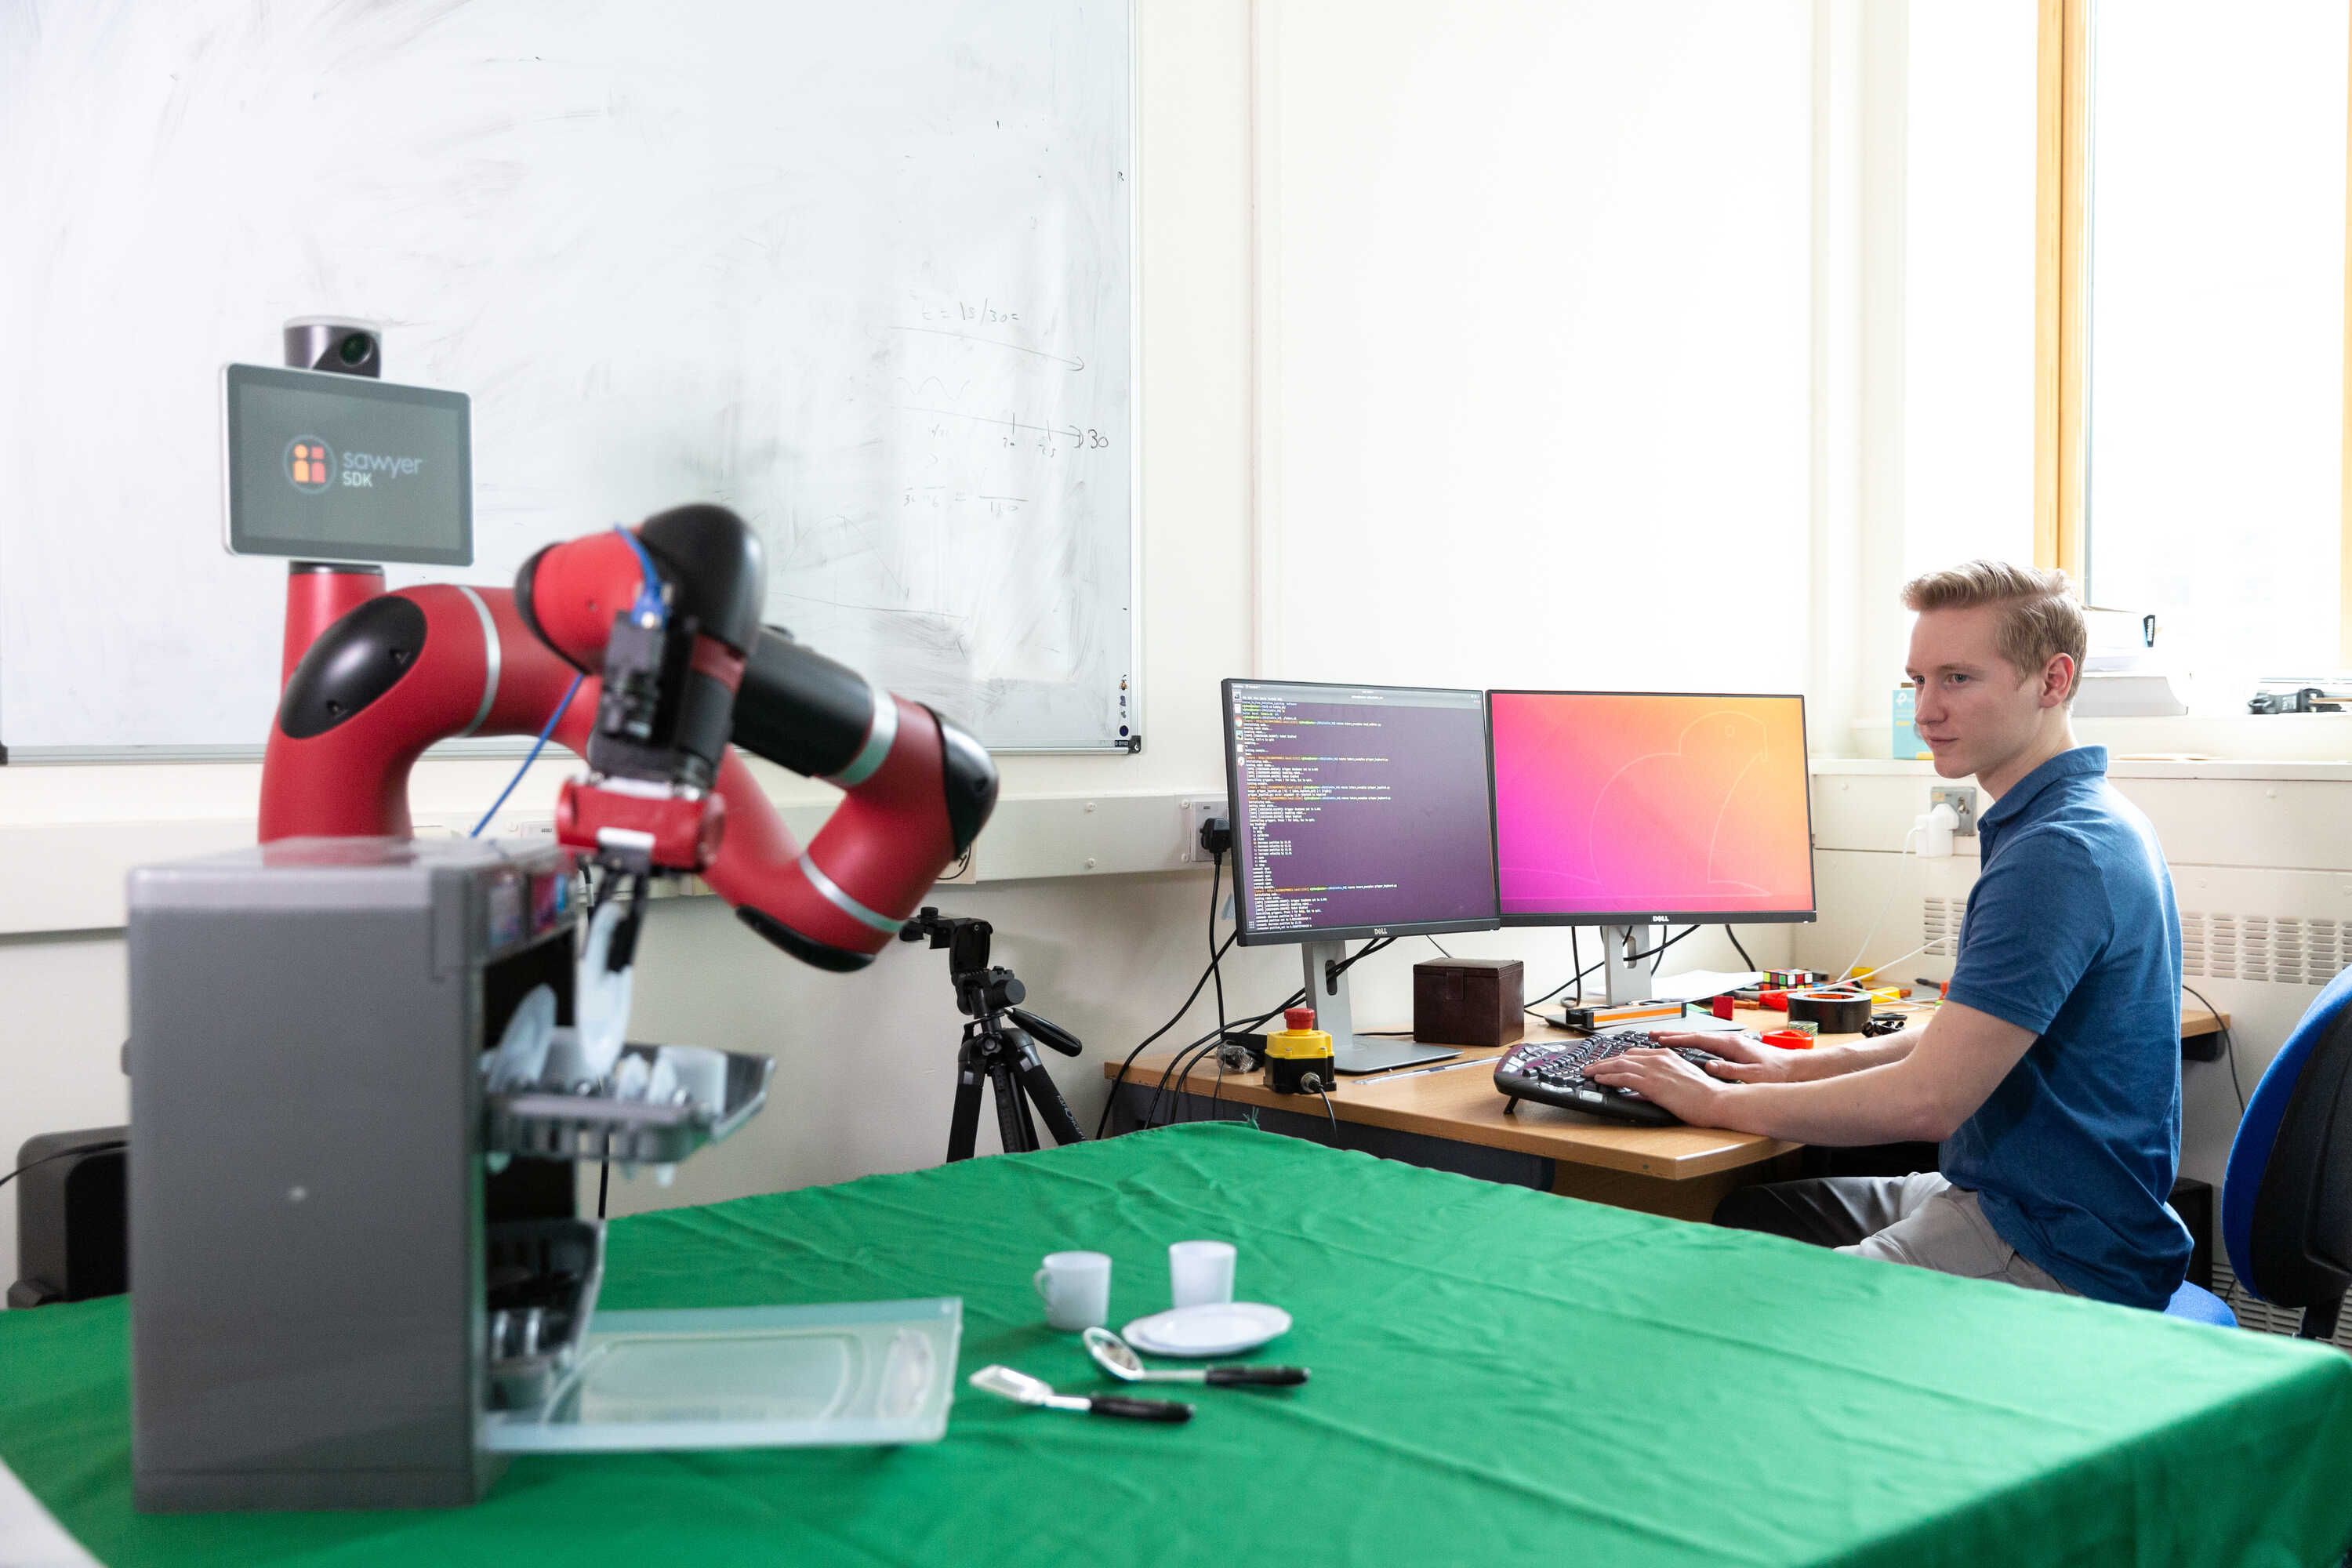 PhD student working with robot